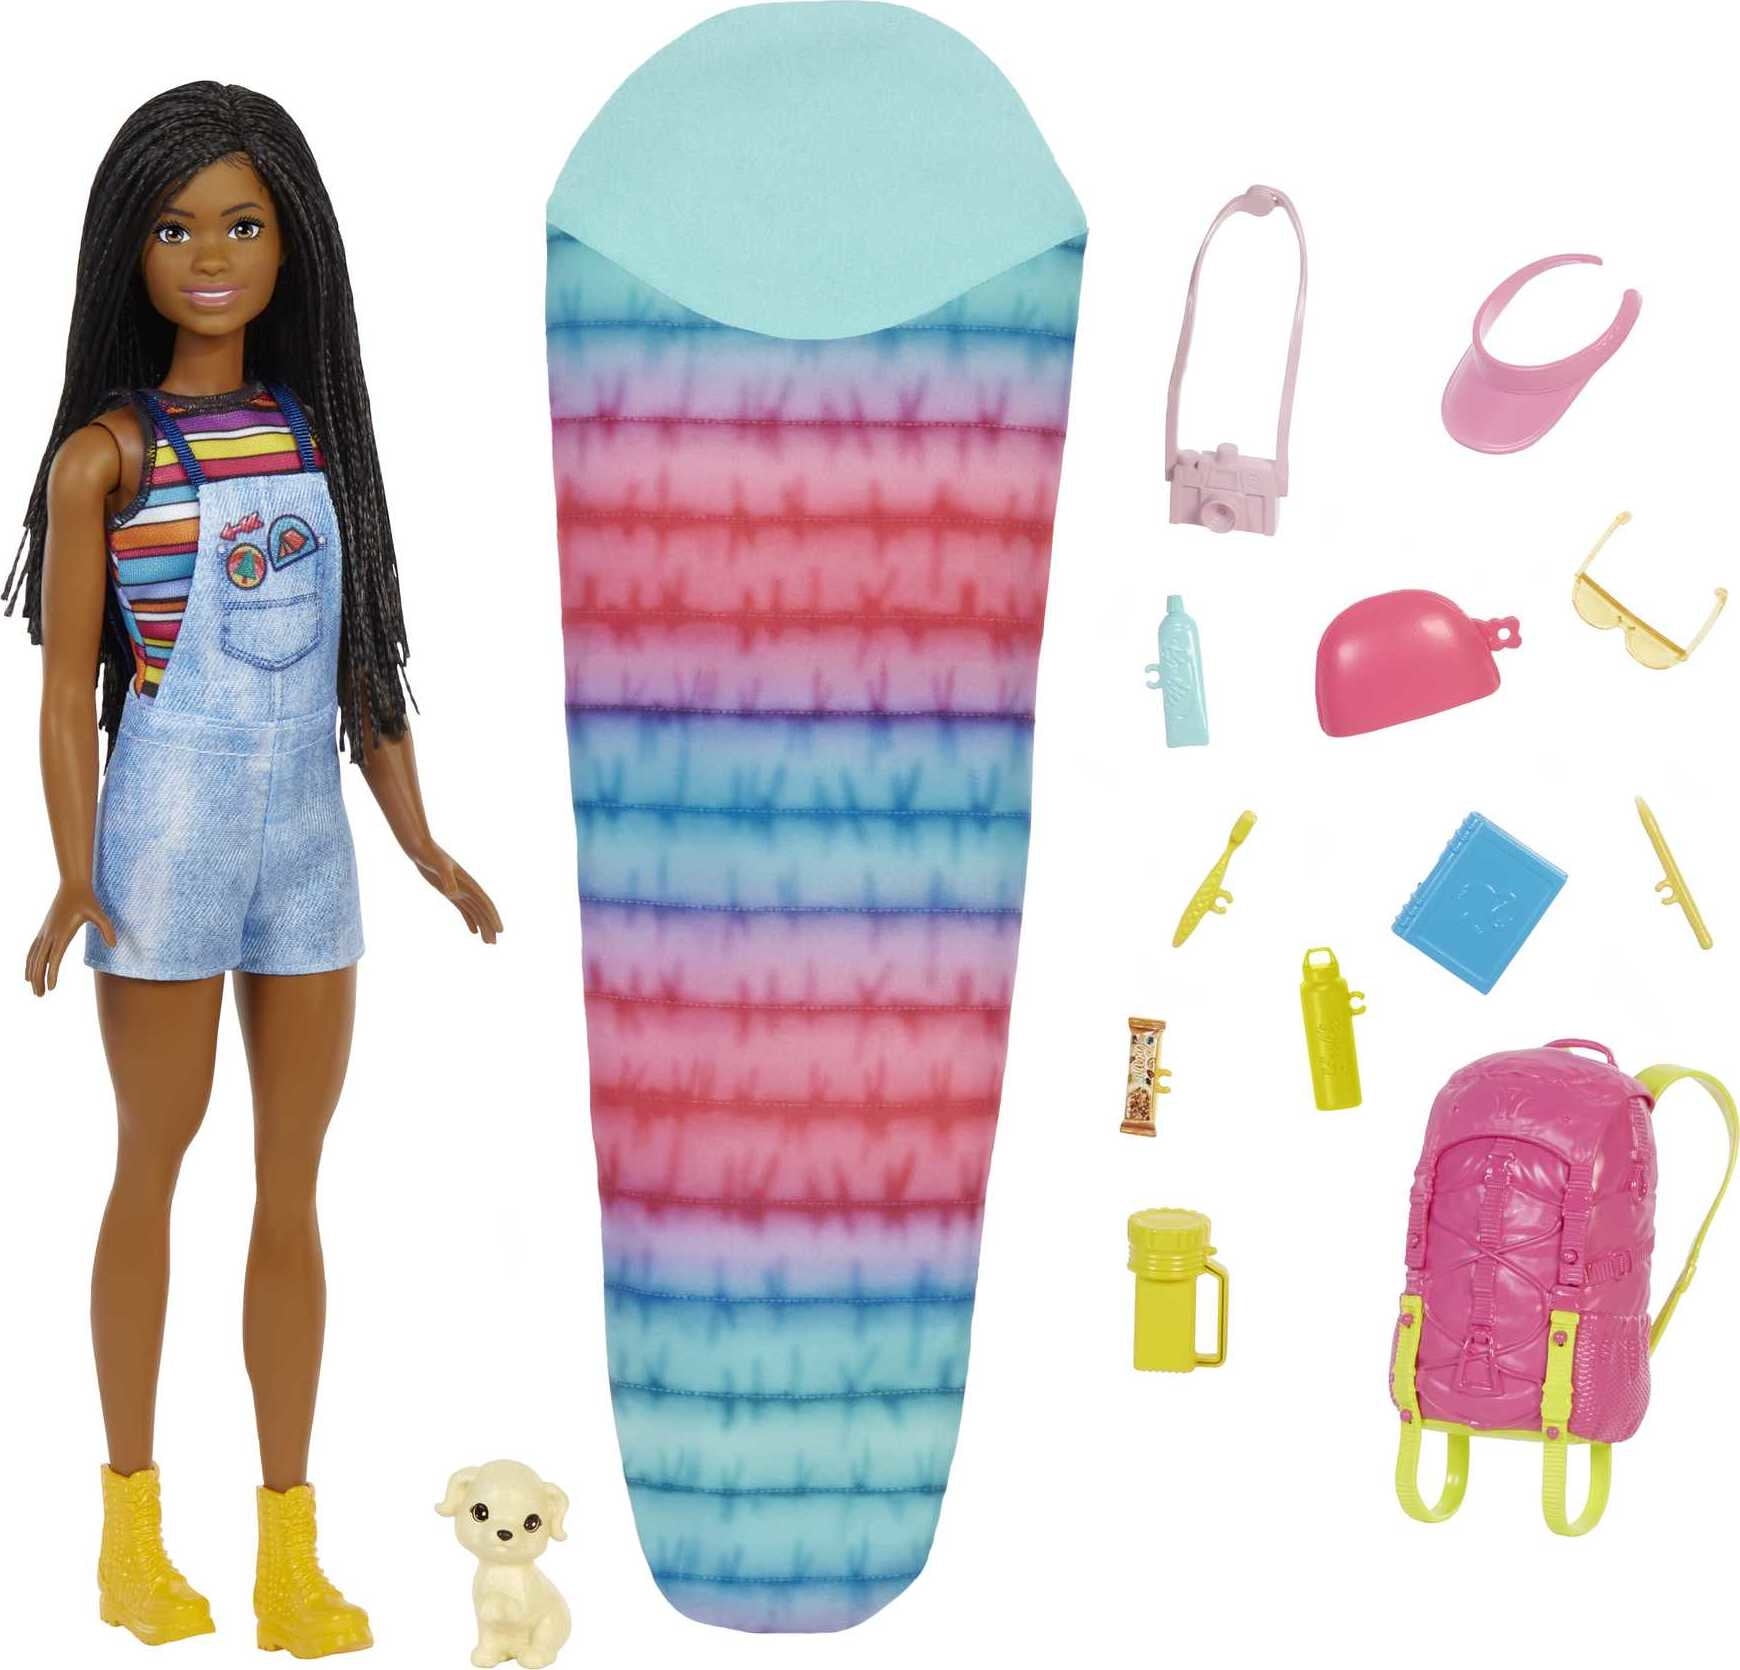 Barbie It Takes Two Brooklyn Doll & 10+ Accessories, Camping-Themed Set with Puppy, Sleeping Bag & More